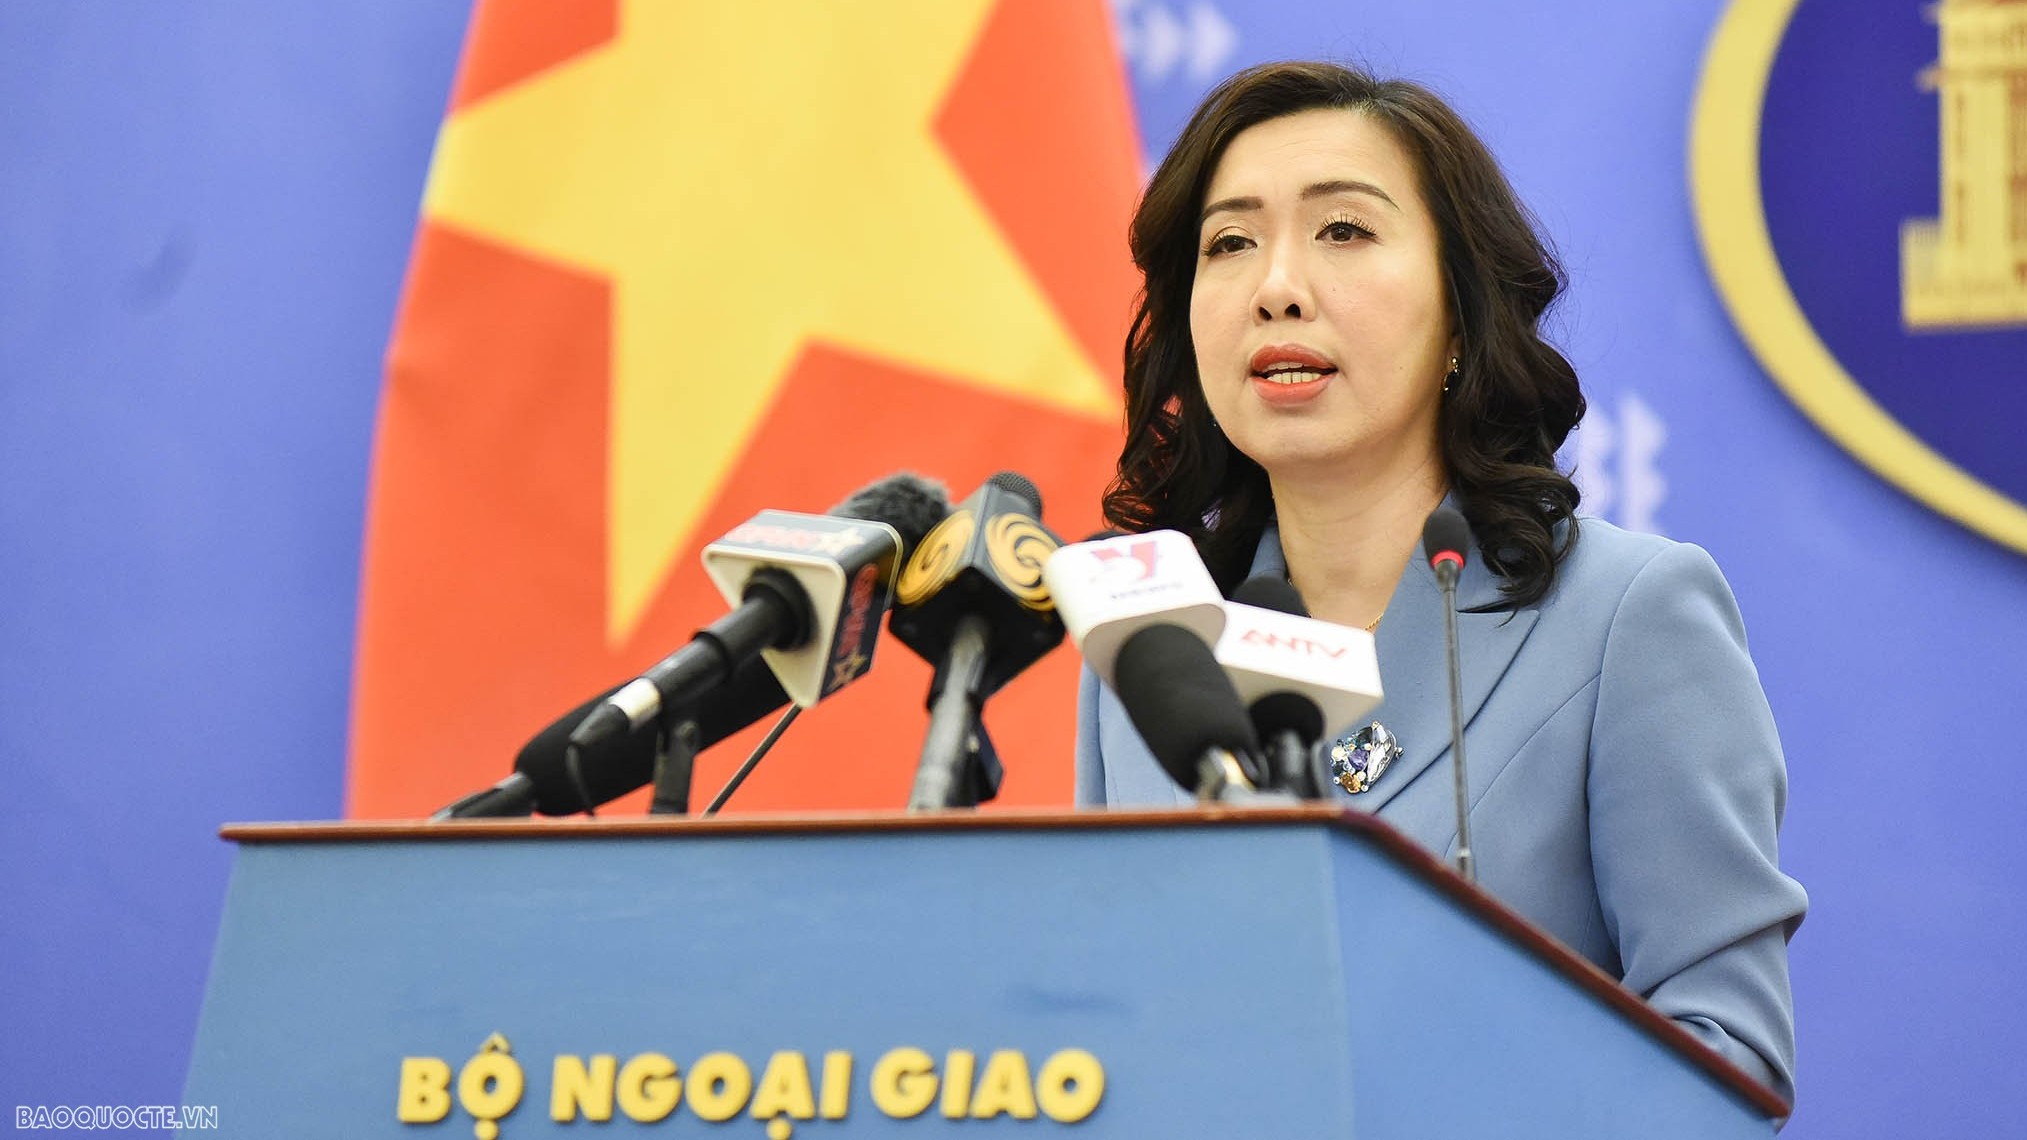 Protecting living environment, people's health is top goal of Vietnam: Spokesperson